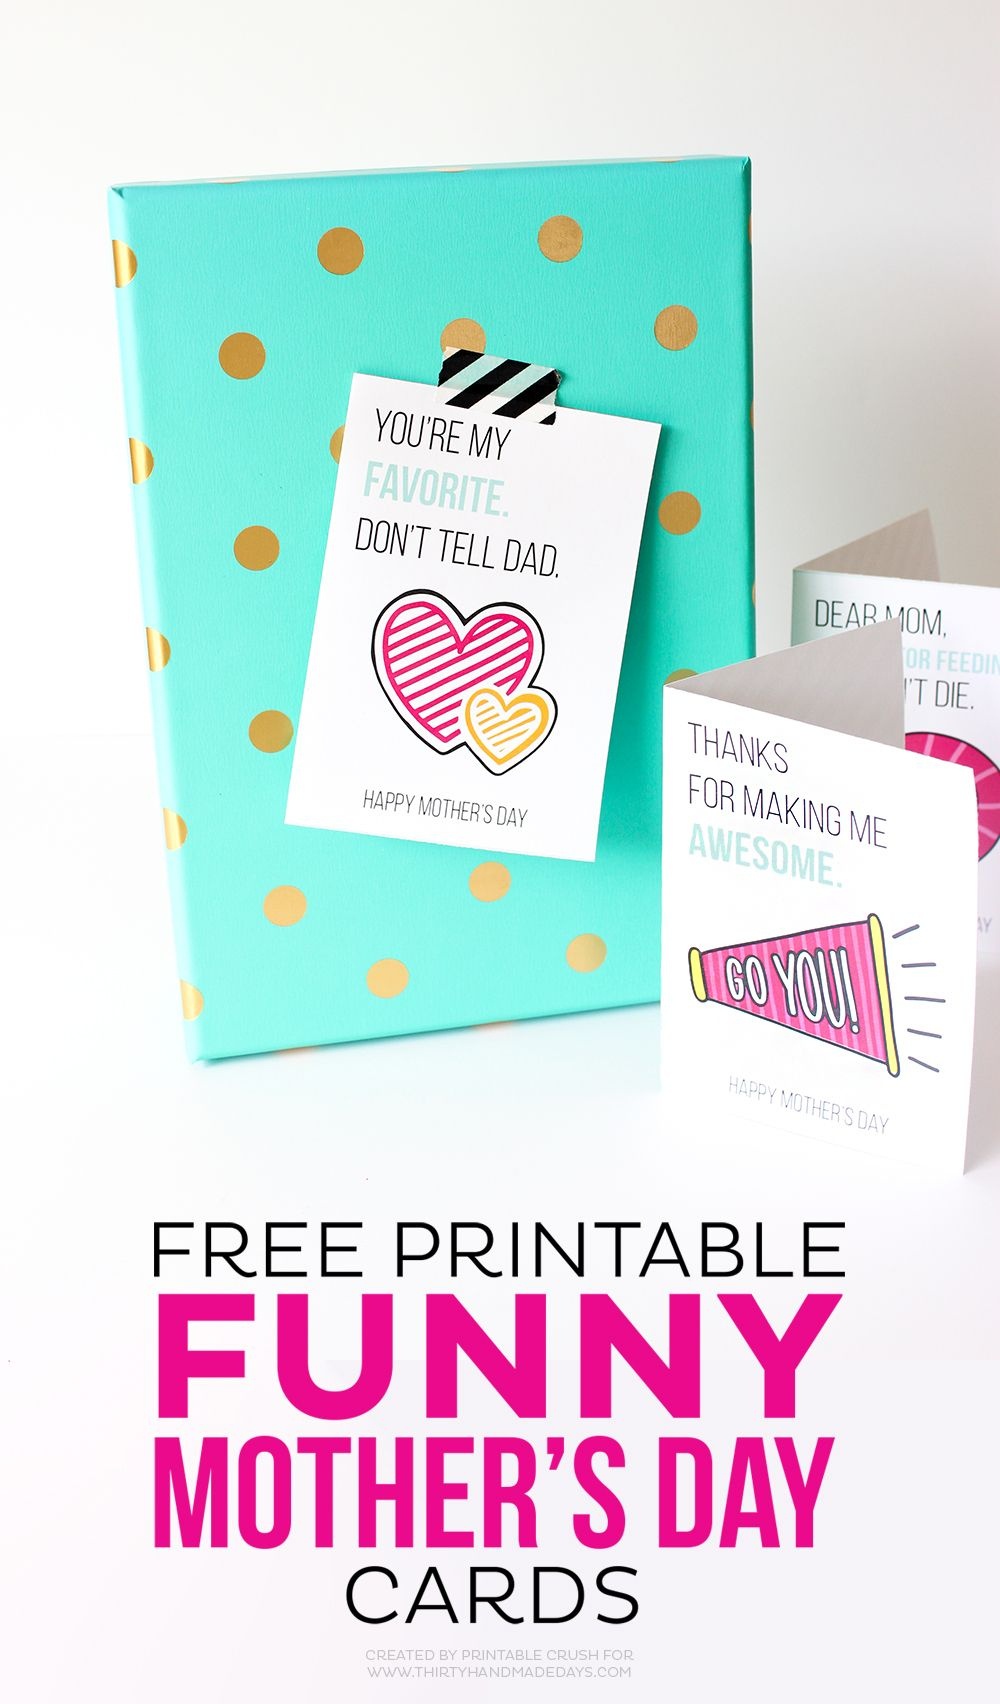 Printable Funny Mother&amp;#039;s Day Cards | Art + Graphic Design Bloggers - Free Printable Funny Mother&amp;#039;s Day Cards